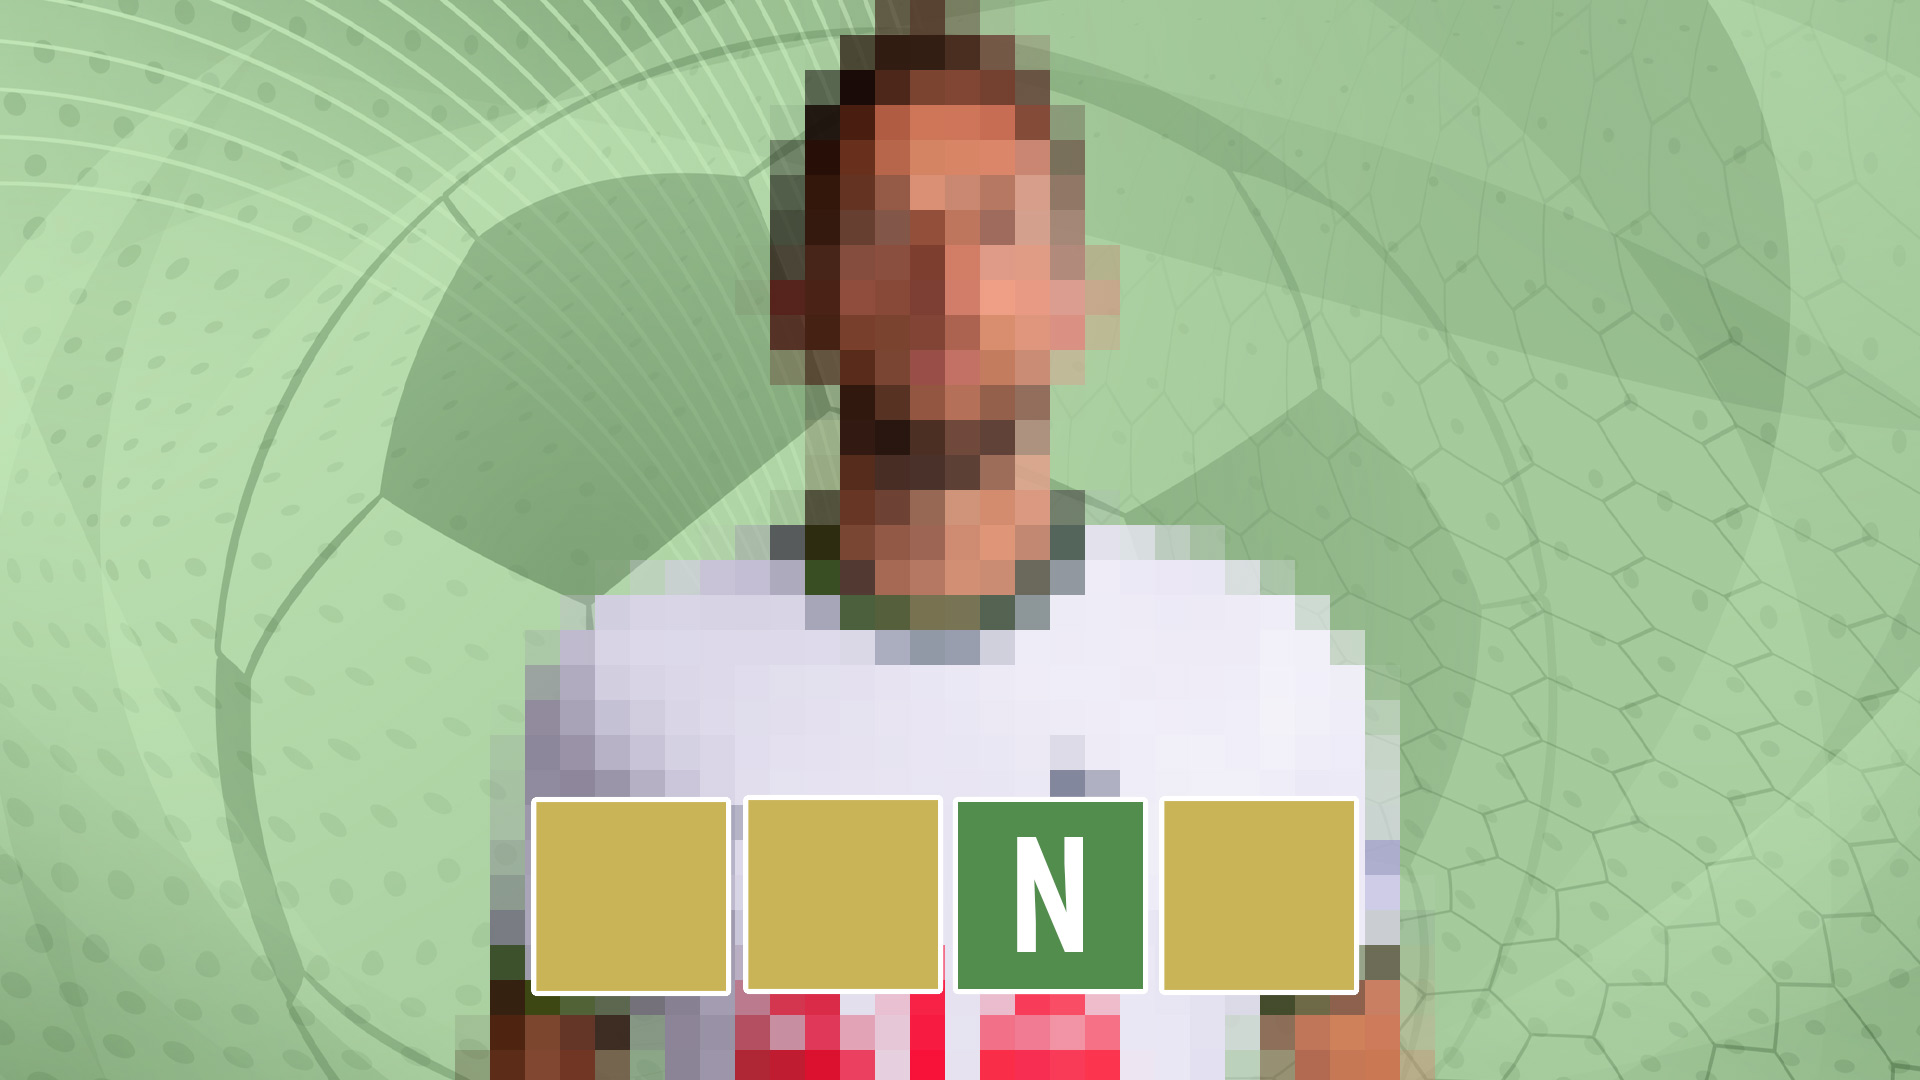 GUESS THE PLAYER - FOOTBALL WORDLE 72 